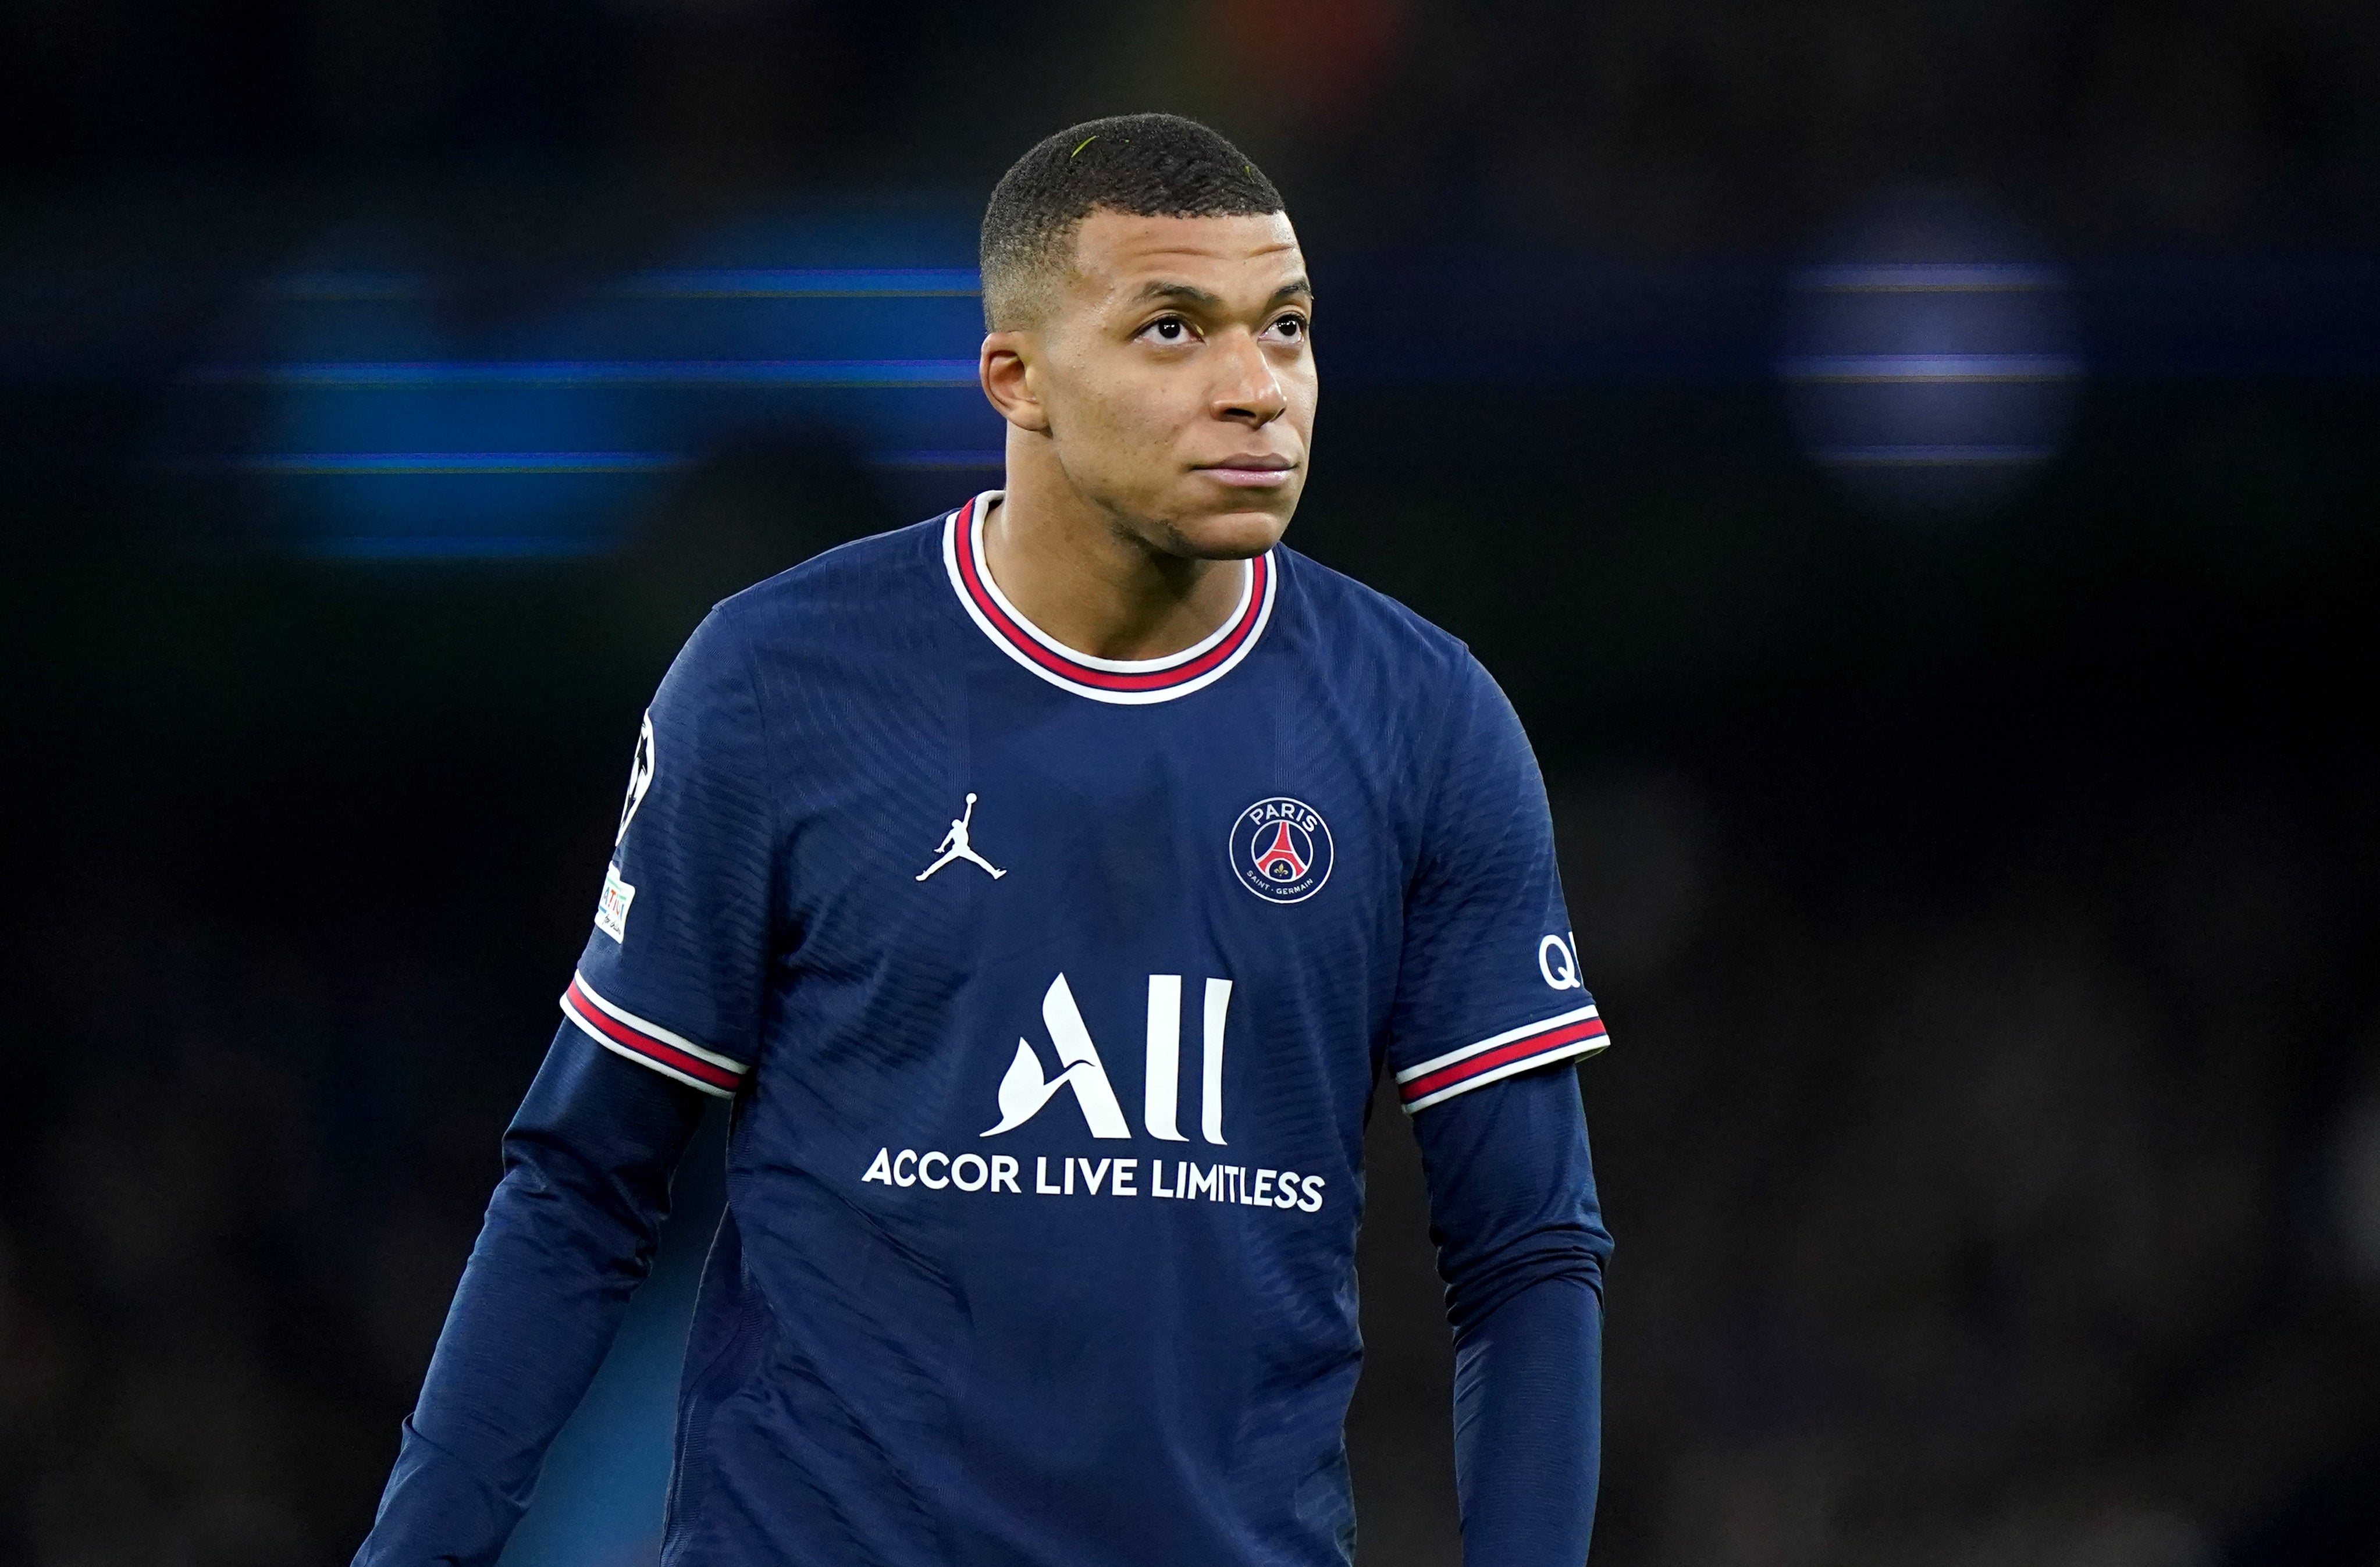 Paris St Germain remain determined to tie Kylian Mbappe to a new contract (Tim Goode/PA)